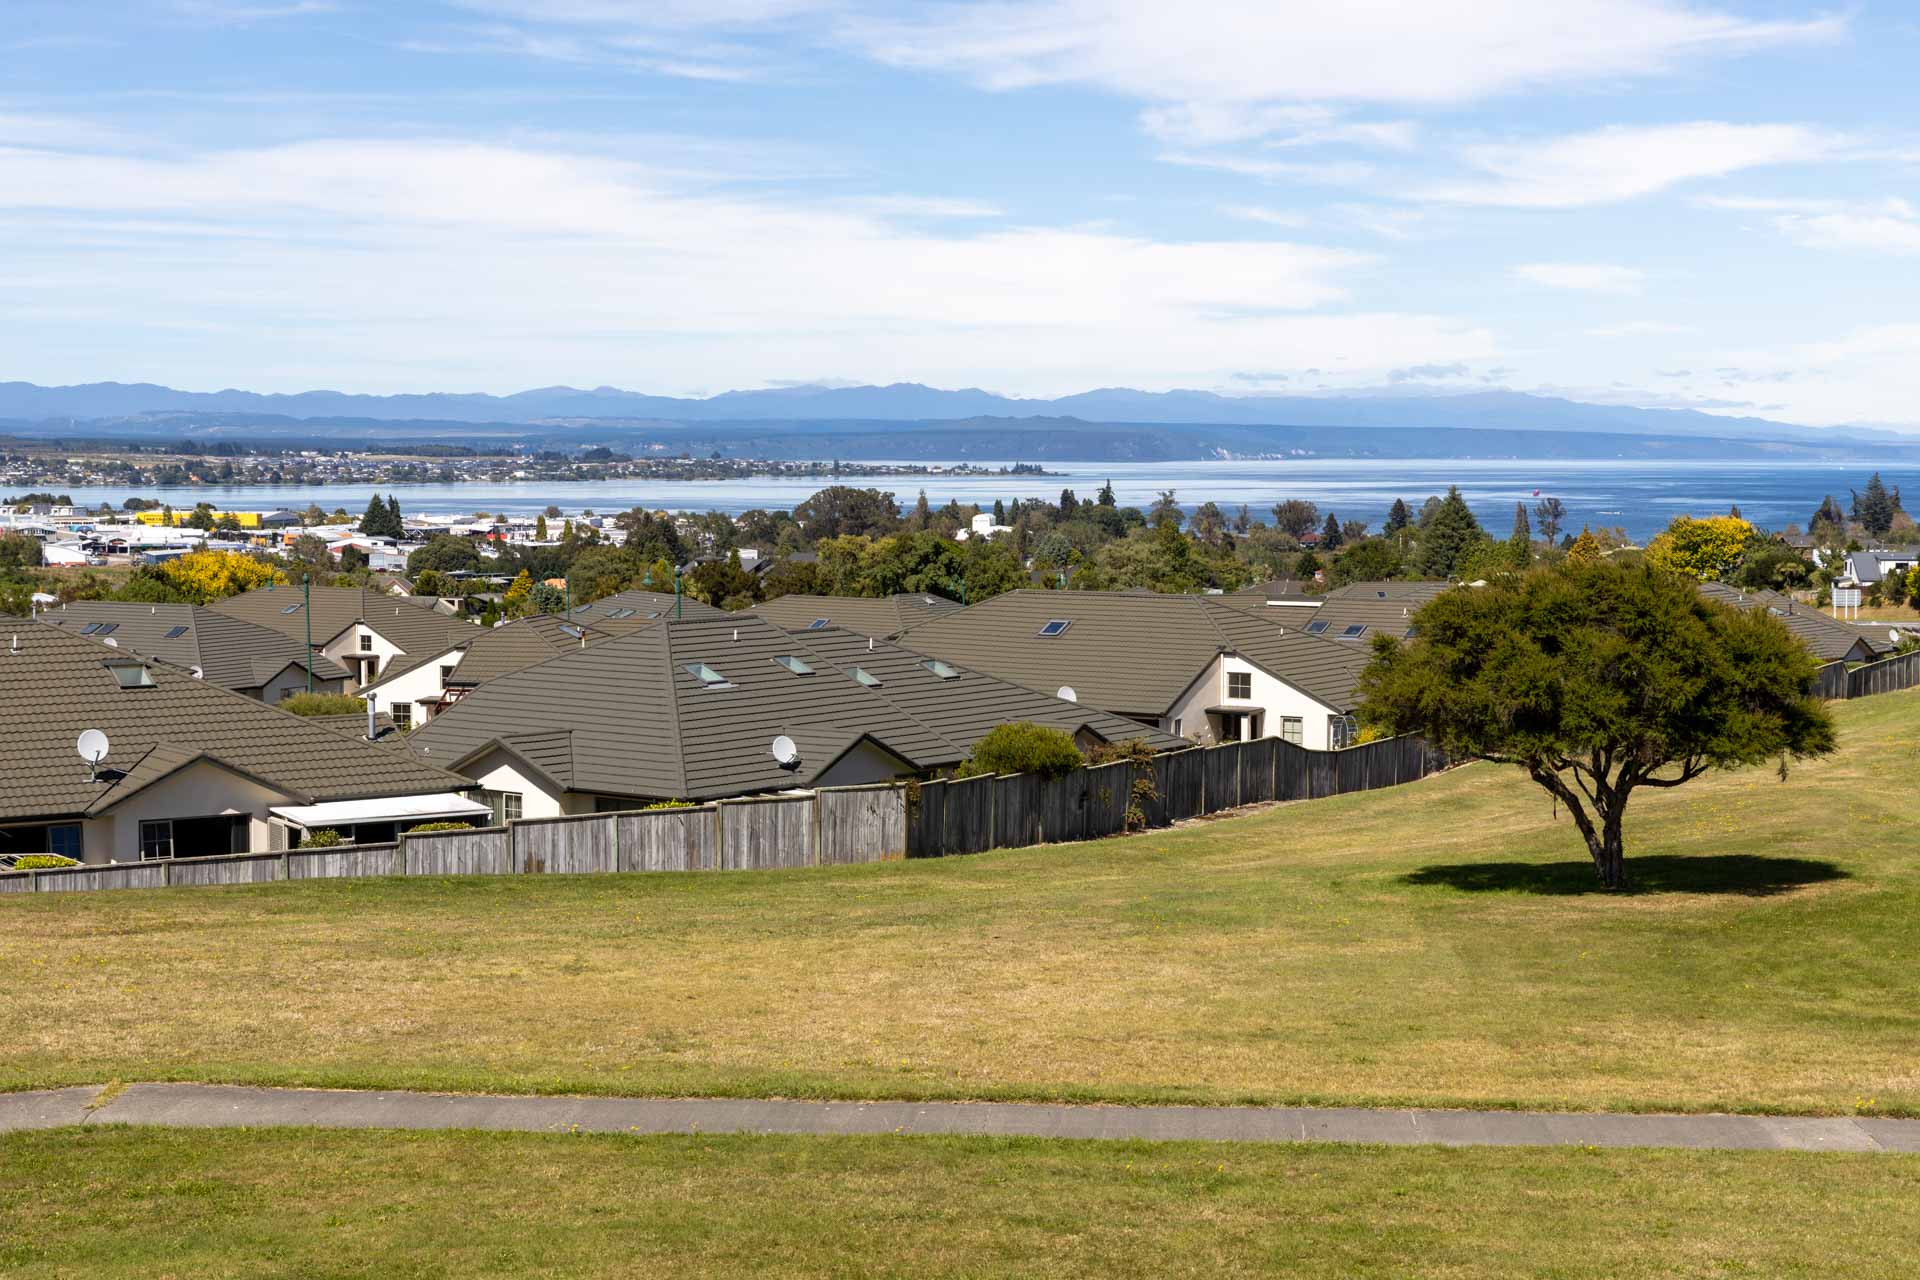 things to do in taupo, taupo new zealand, taupo tourist attractions